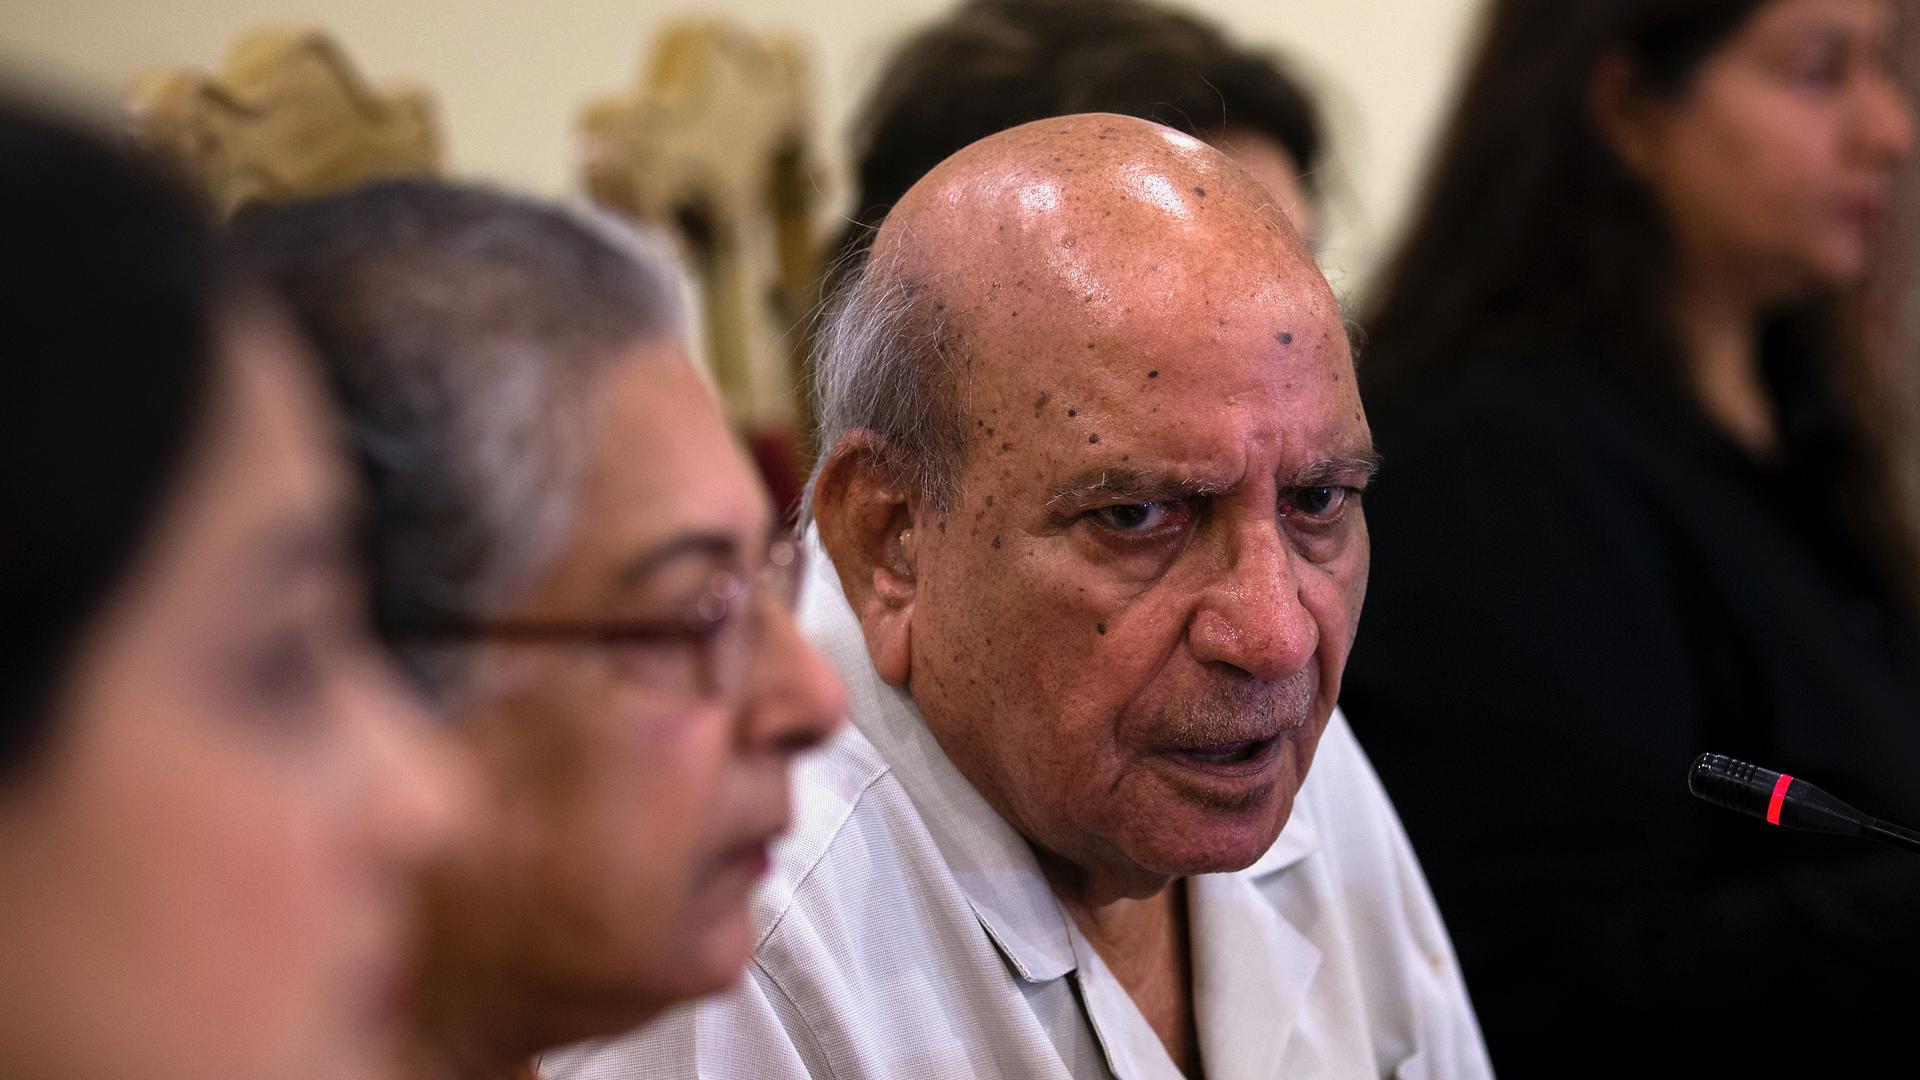 IA Rehman, center, an official from the Human Rights Commission addresses a news conference, in Islamabad, Pakistan, July 16, 2018. Rehman, an iconic Pakistani human rights defender and former editor, has died in the eastern city of Lahore after a brief i